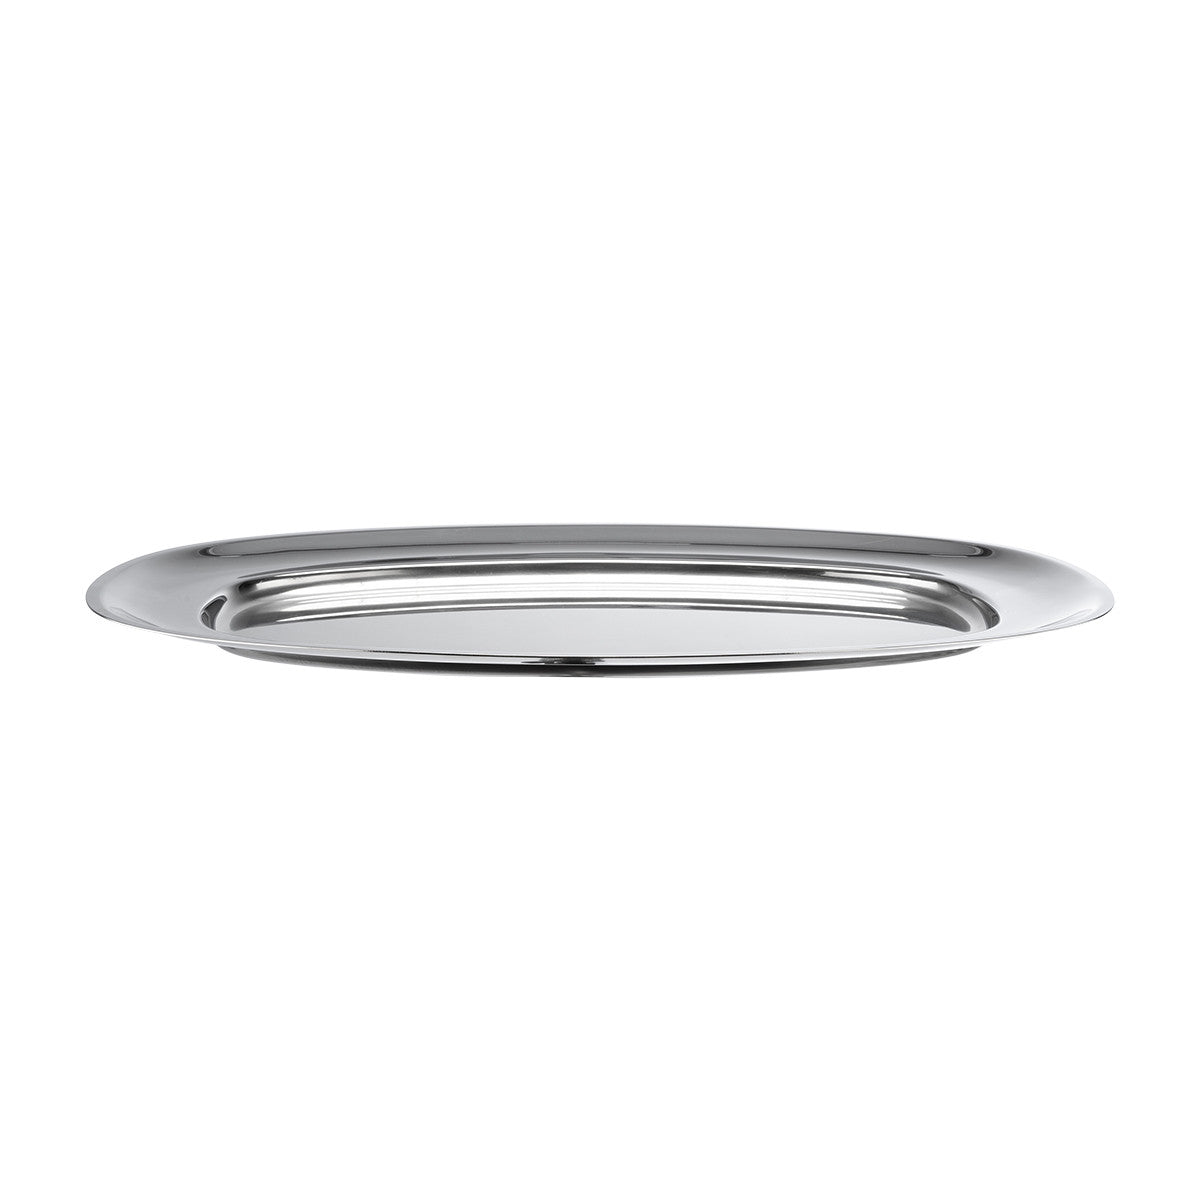 SERVING TRAY 45x32 cm, STAINLESS STEEL